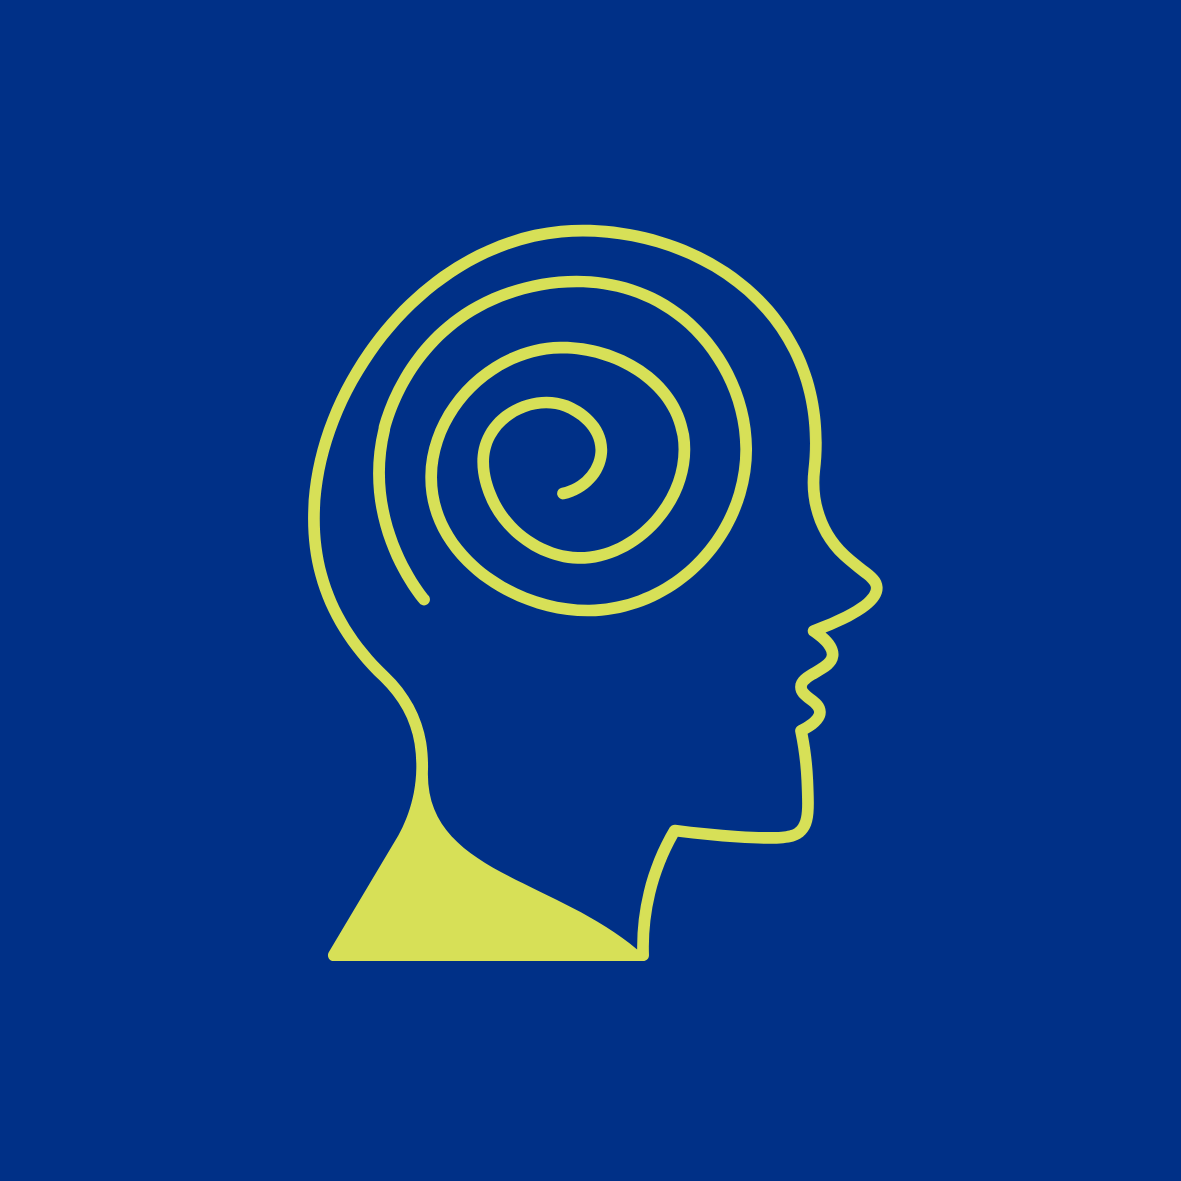 Outline of a Head With a 'Spiral' Inside to Represent Depression